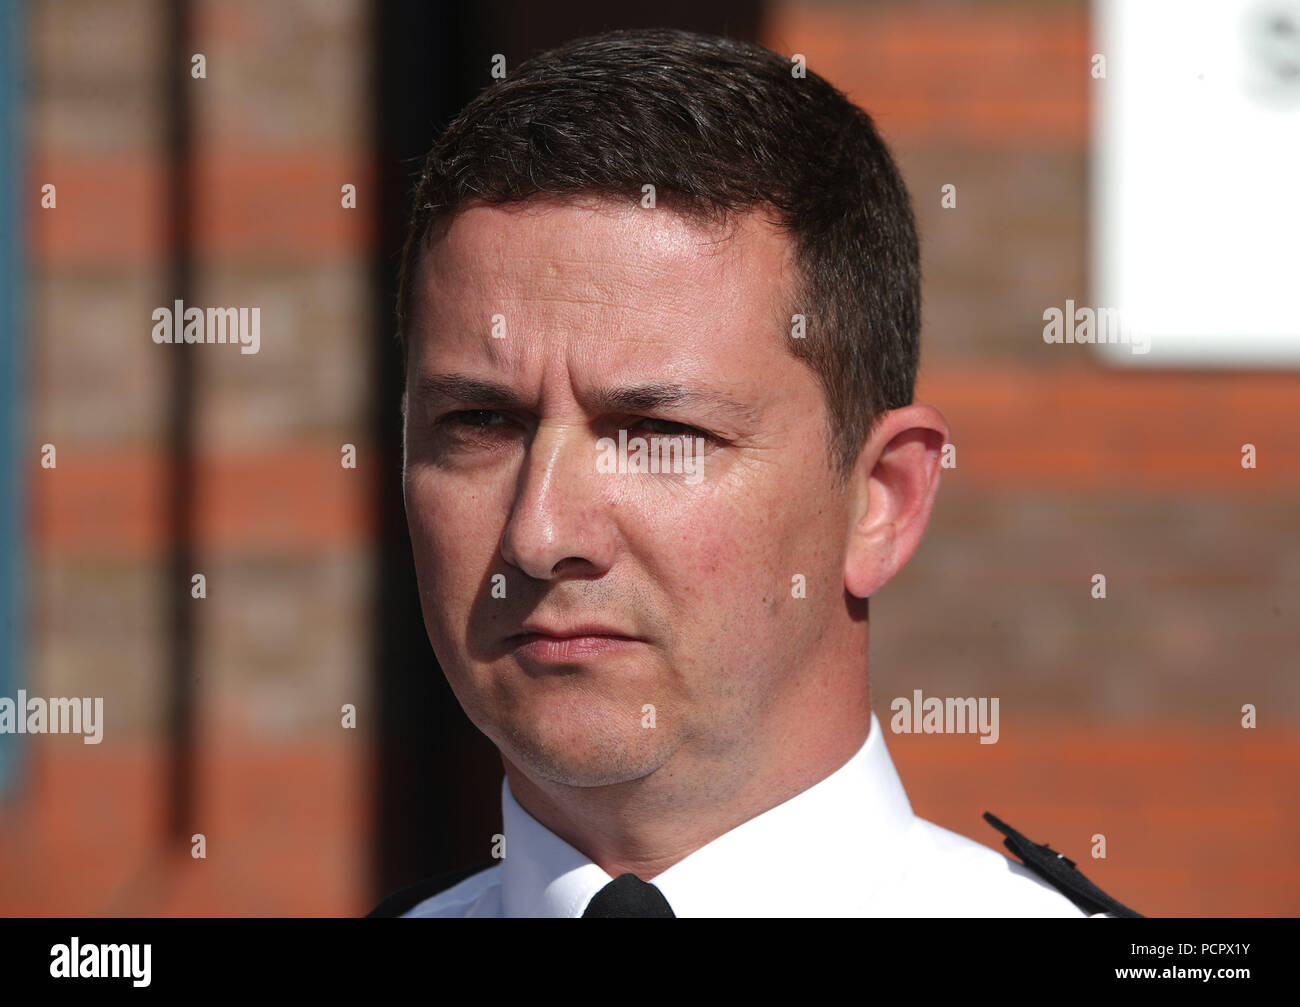 Sussex Police Assistant Chief Constable Steve Barry speaking to the media after a misconduct hearing over the death of Duncan Tomlin - who died in hospital two days after a struggle with police in West Sussex on 26 July 2014 - at the Office of the Police and Crime Commissioner in Lewes, Sussex. Stock Photo